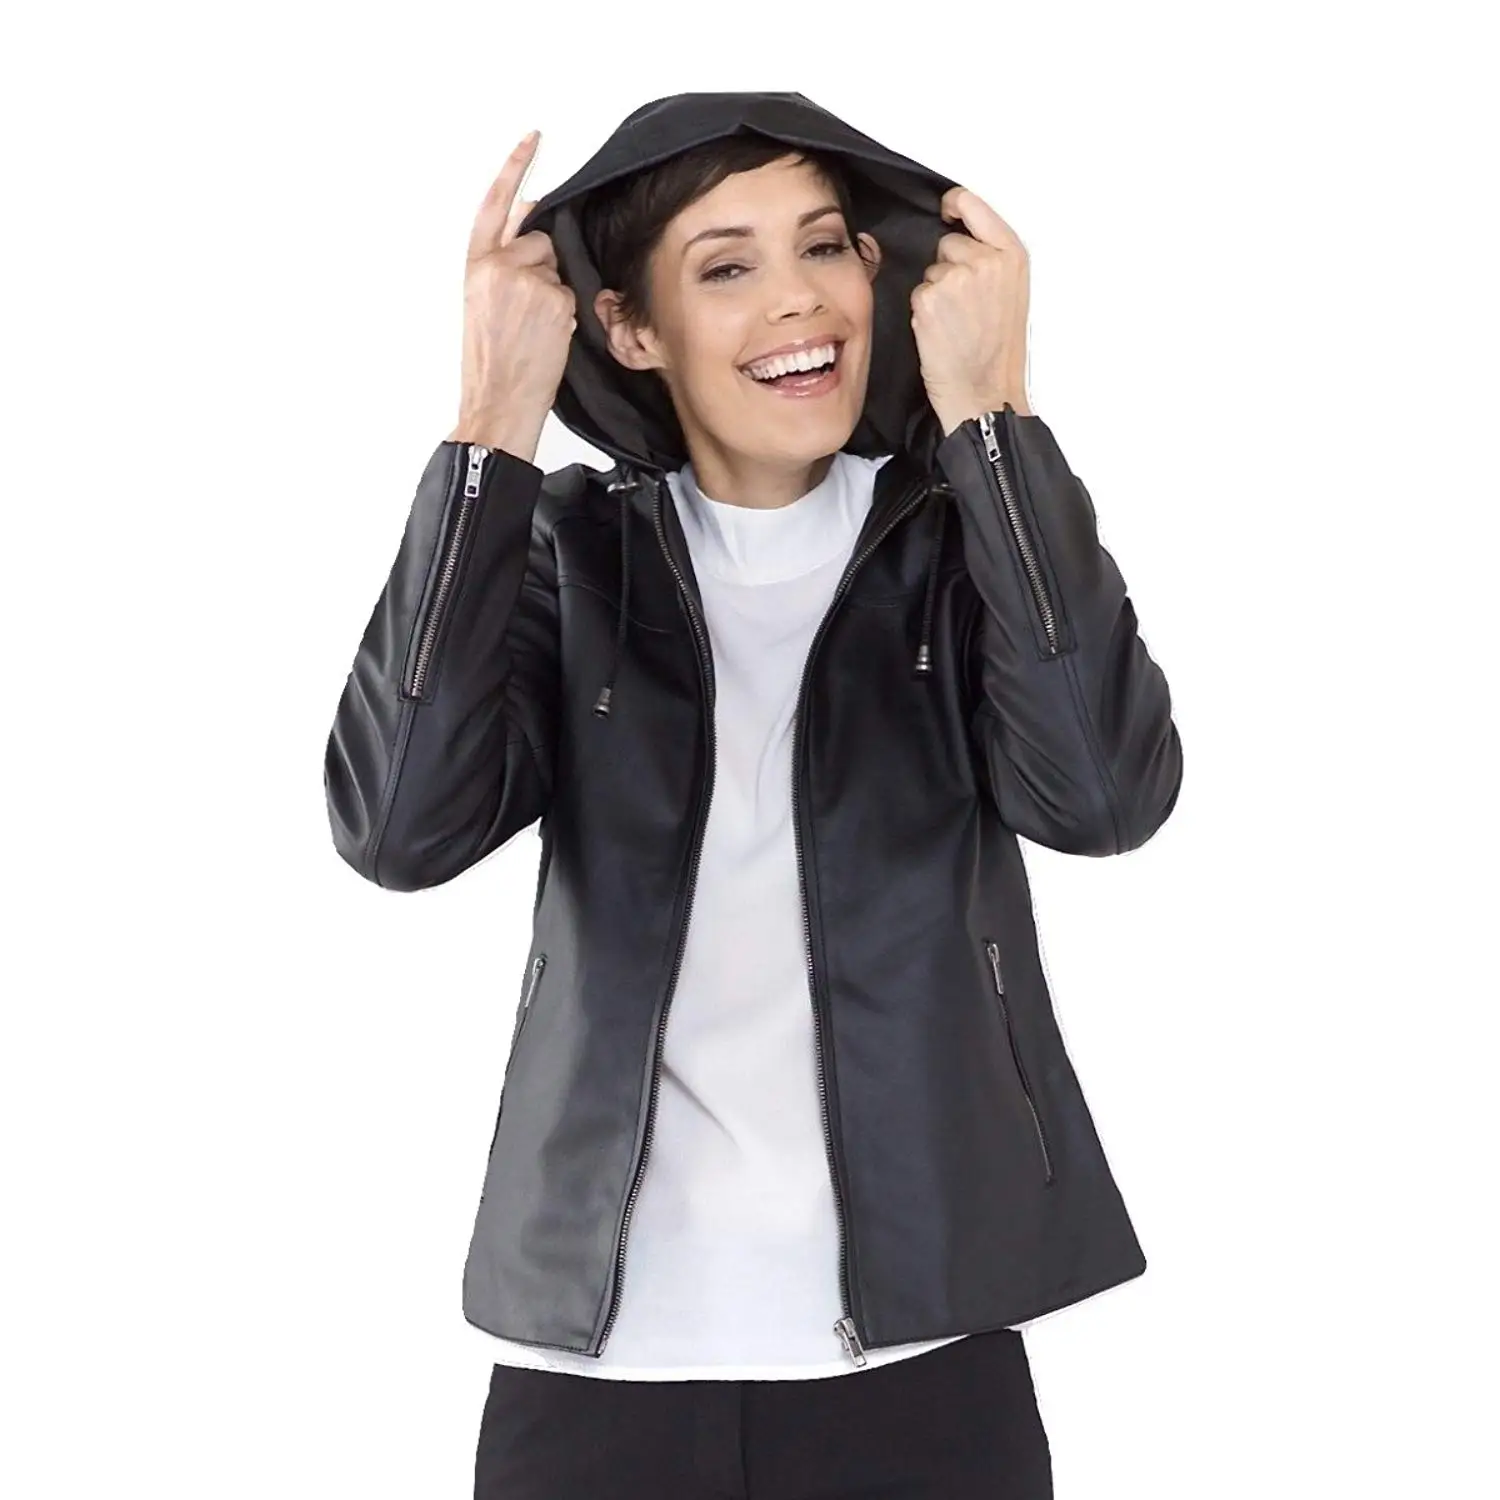 Cheap Black Leather Jacket With Grey Hoodie, find Black Leather Jacket